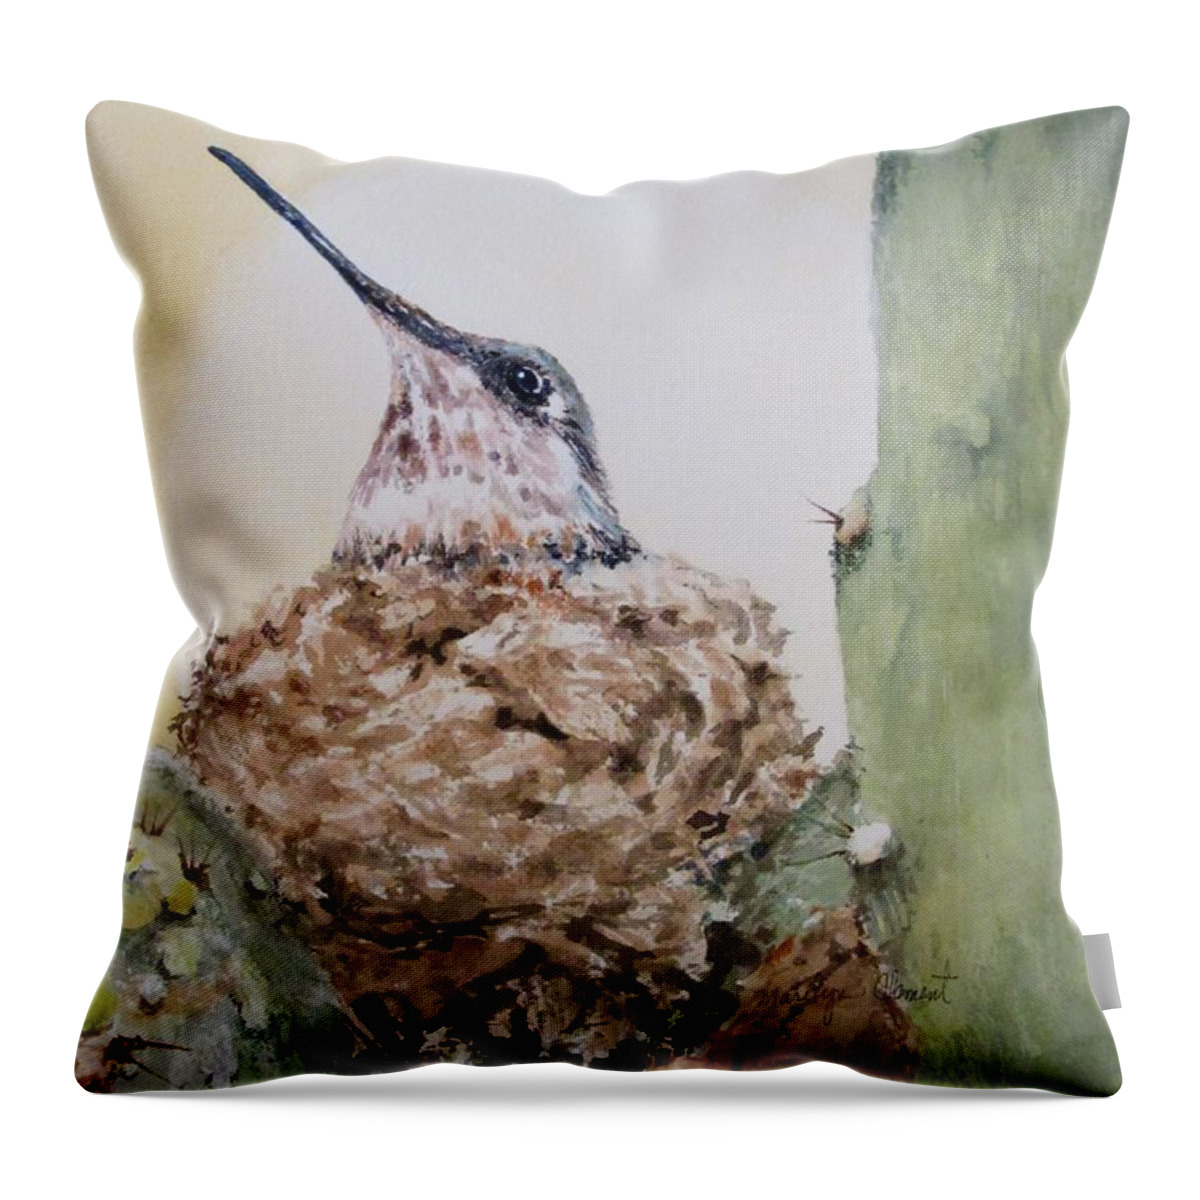 Birds Throw Pillow featuring the painting Hummingbird Nesting in Cactus by Marilyn Clement